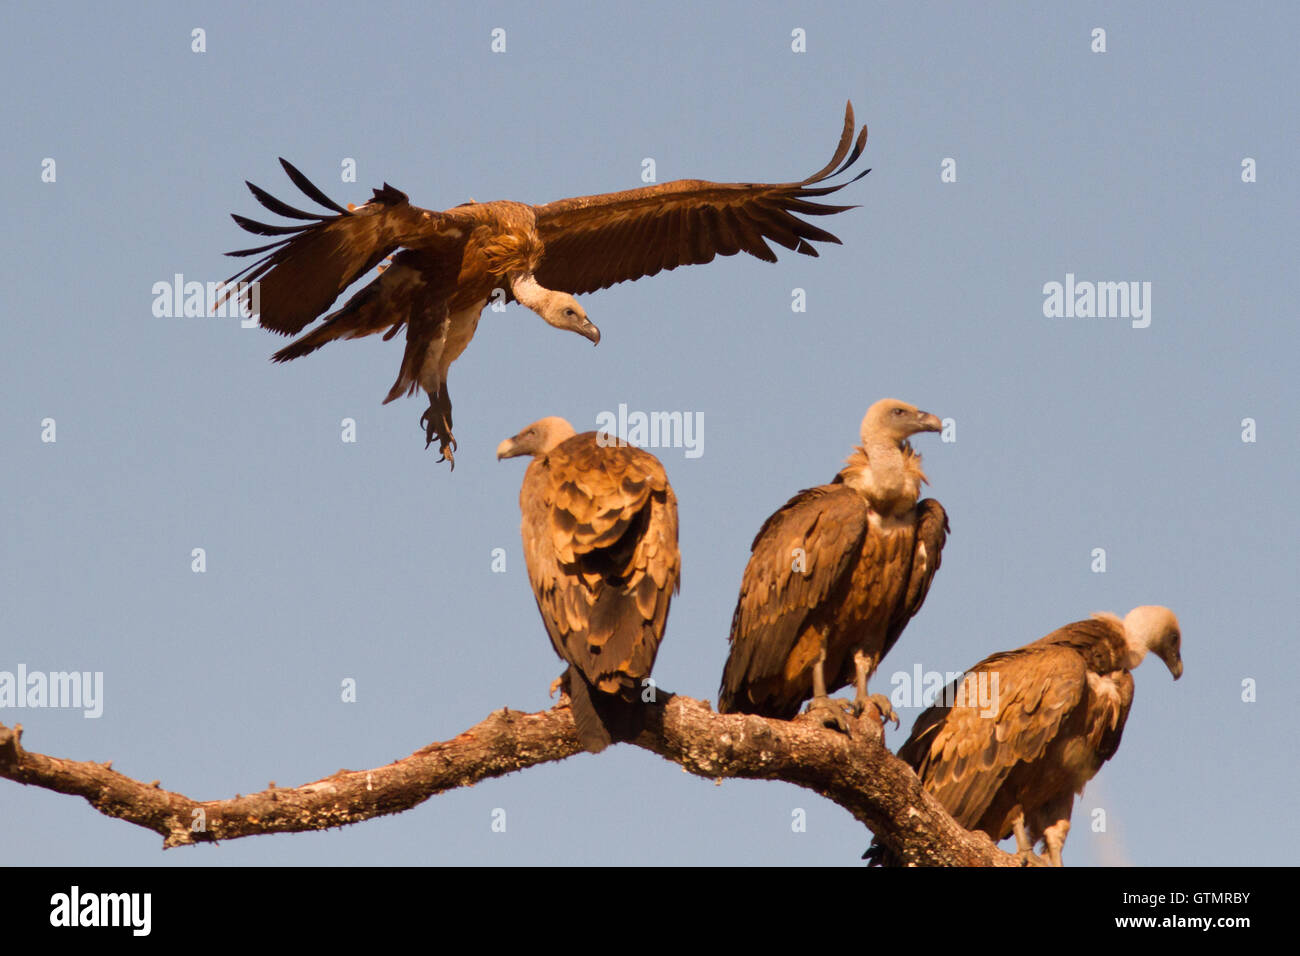 Griffon vulture (Gyps fulvus) is landing on perch with other birds, Spain Stock Photo